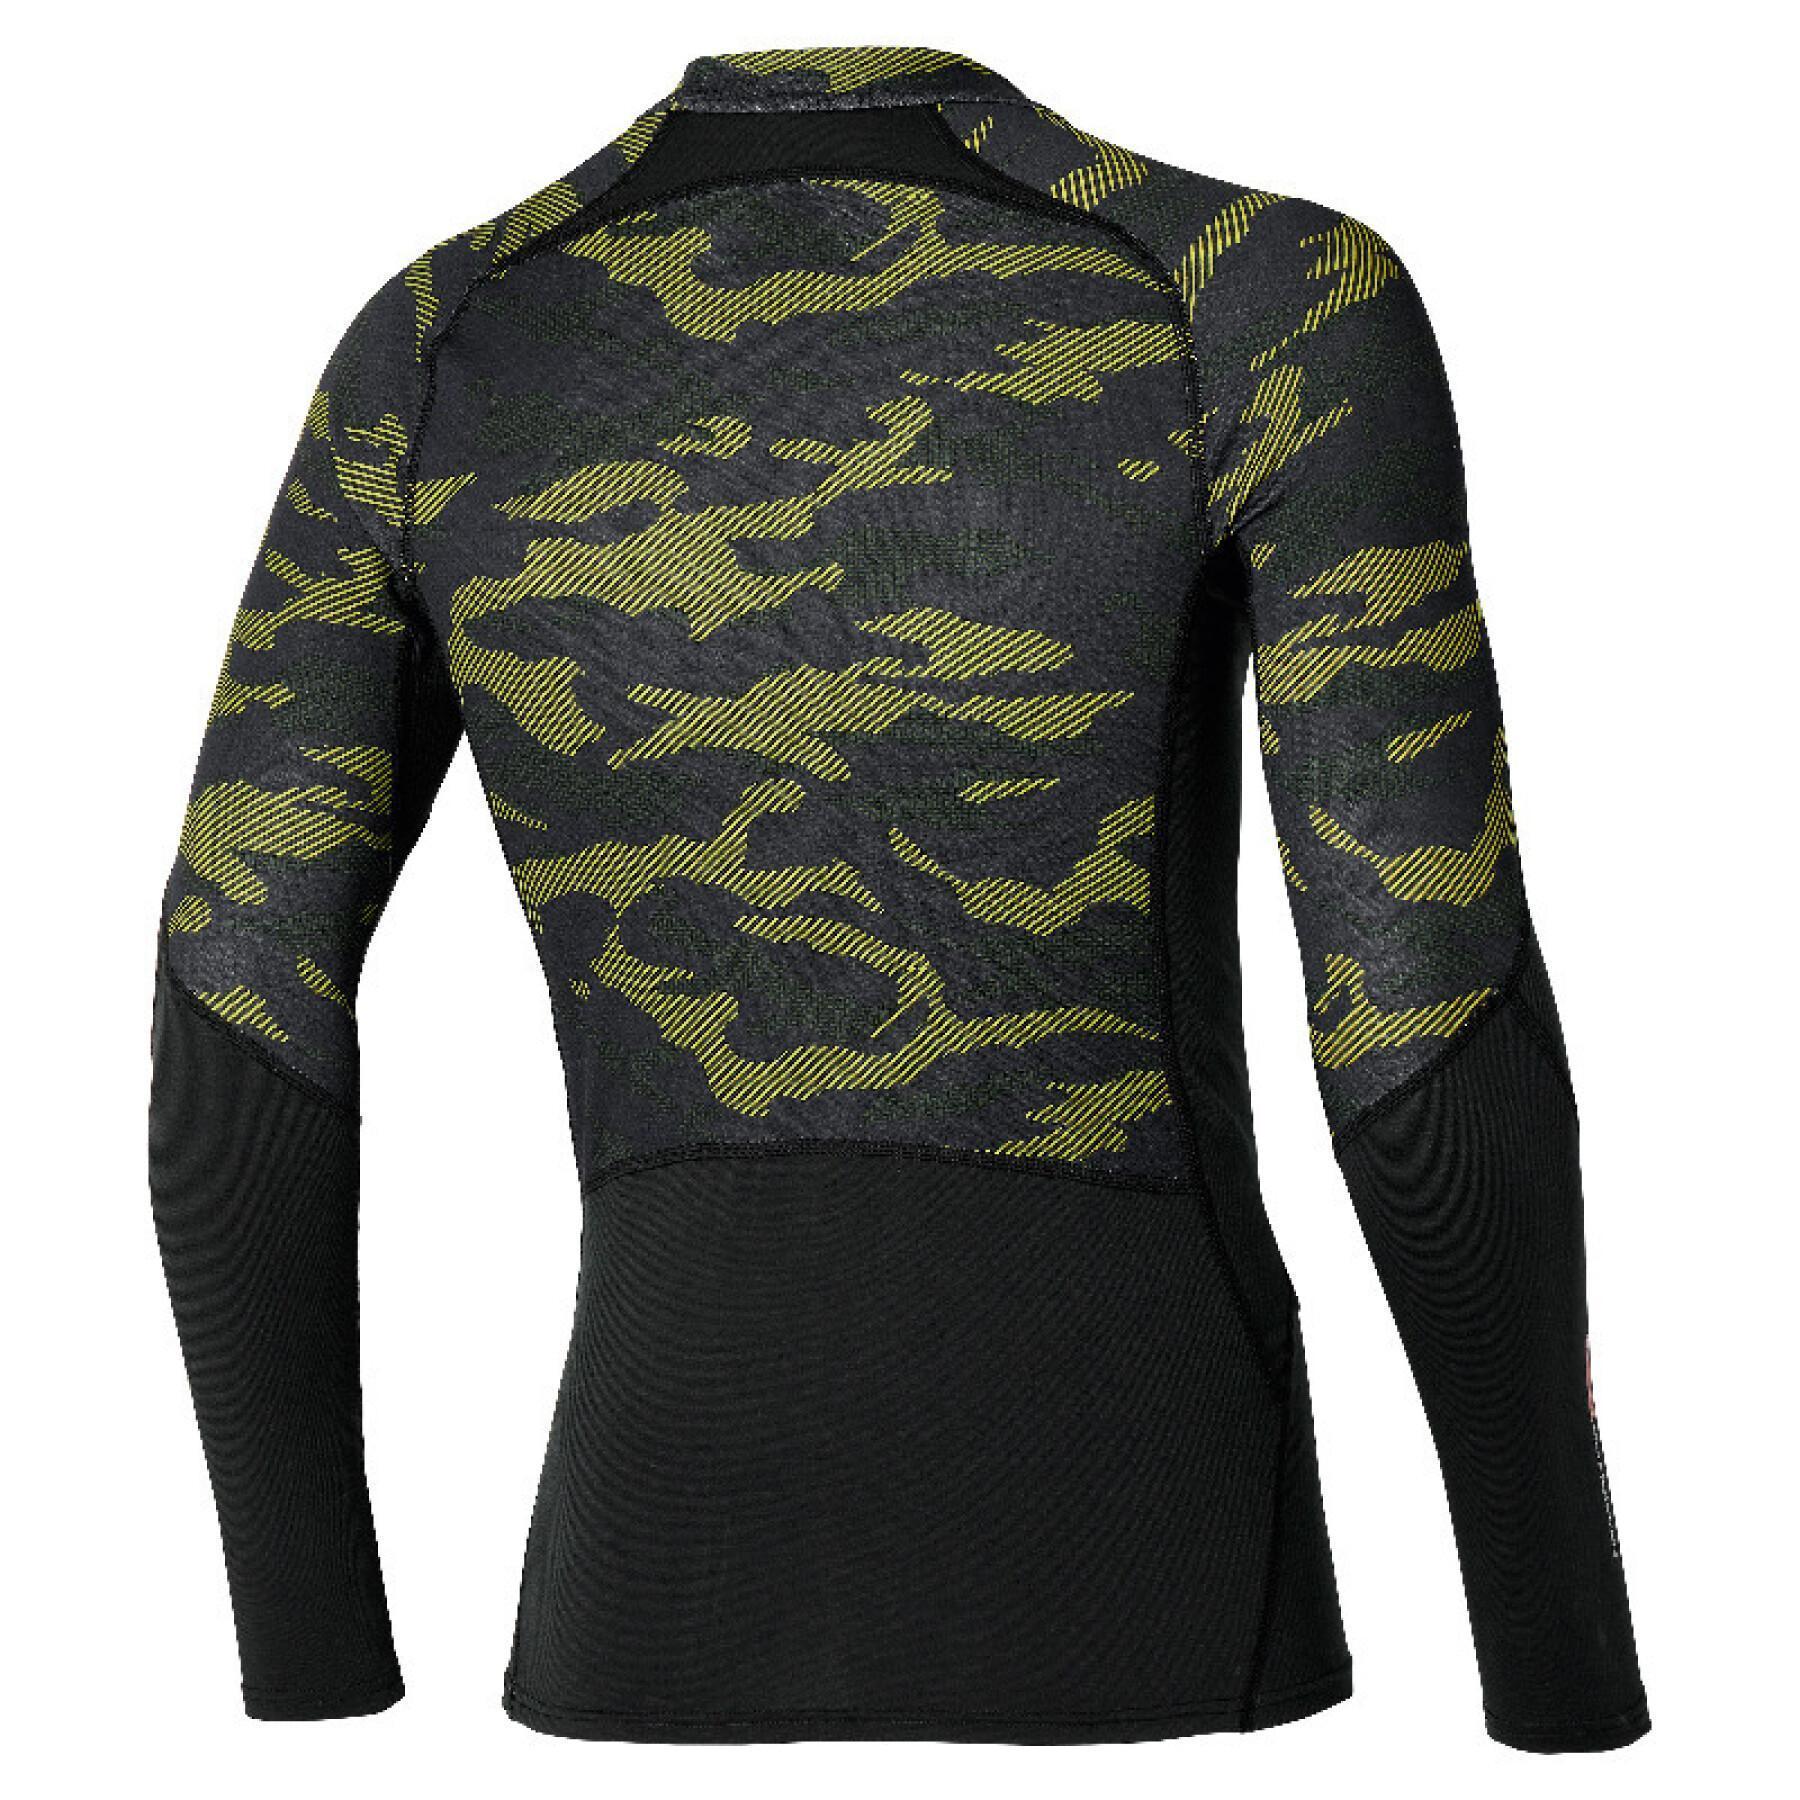 Long sleeve jersey with stand-up collar Mizuno Breath Thermo Virtual G3